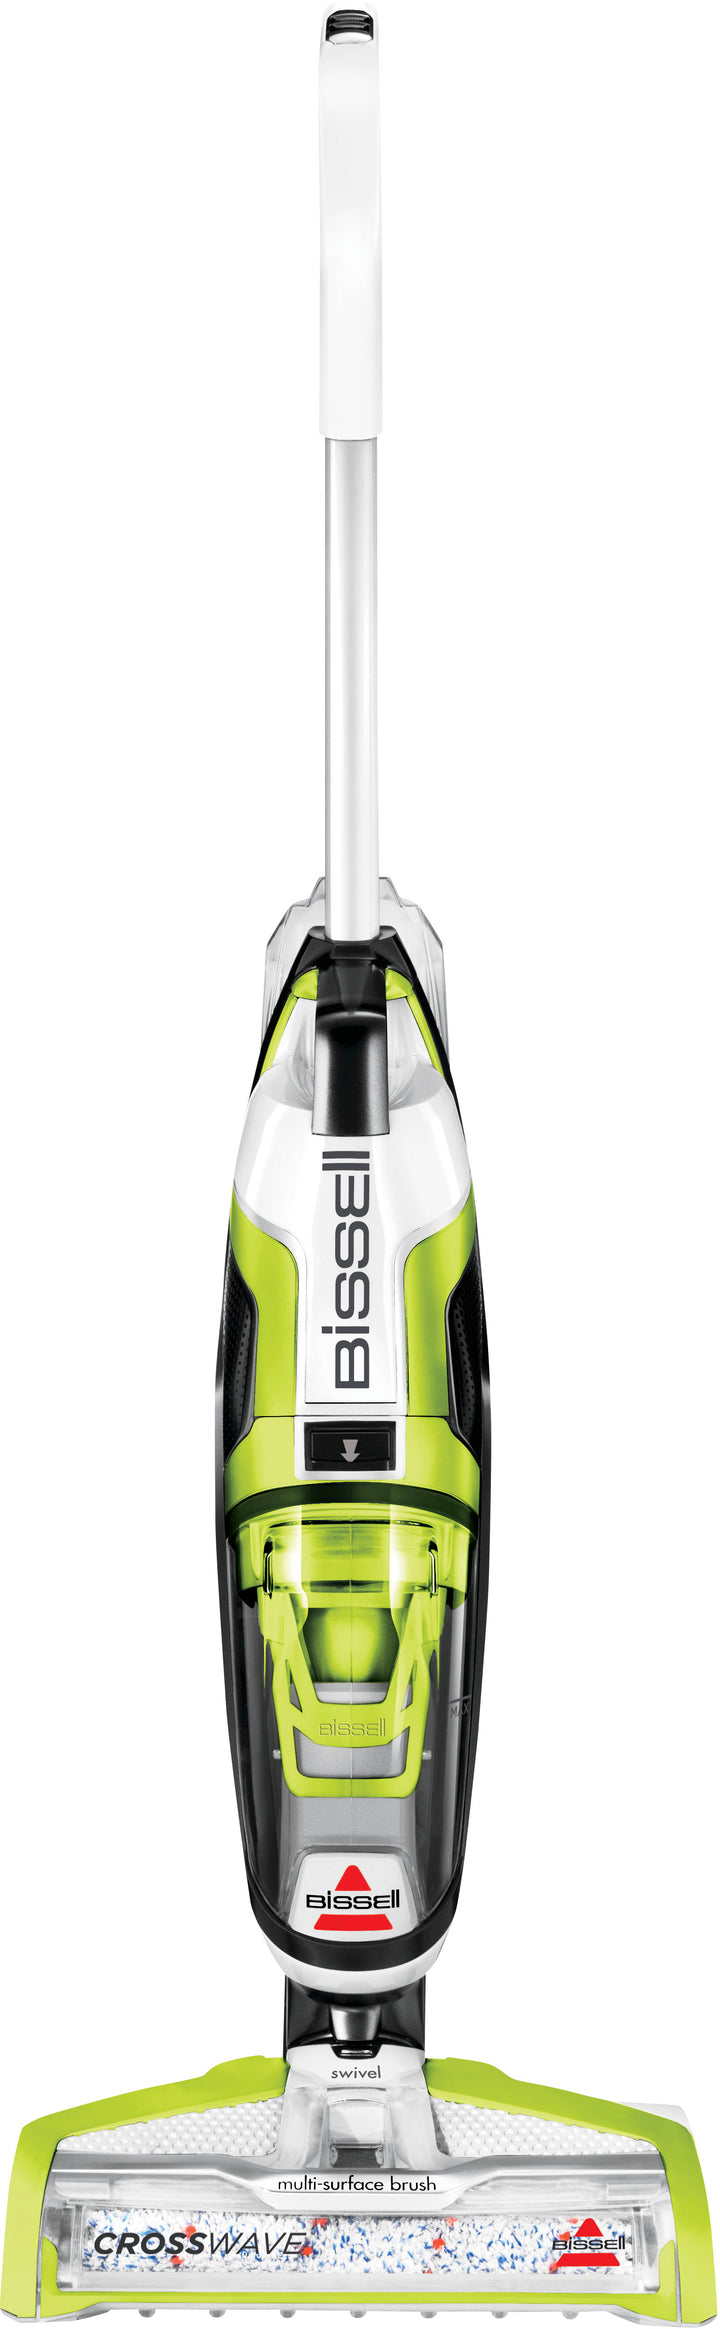 BISSELL CrossWave Turbo - Molded White, Titanium with Cha Cha Lime accent_0